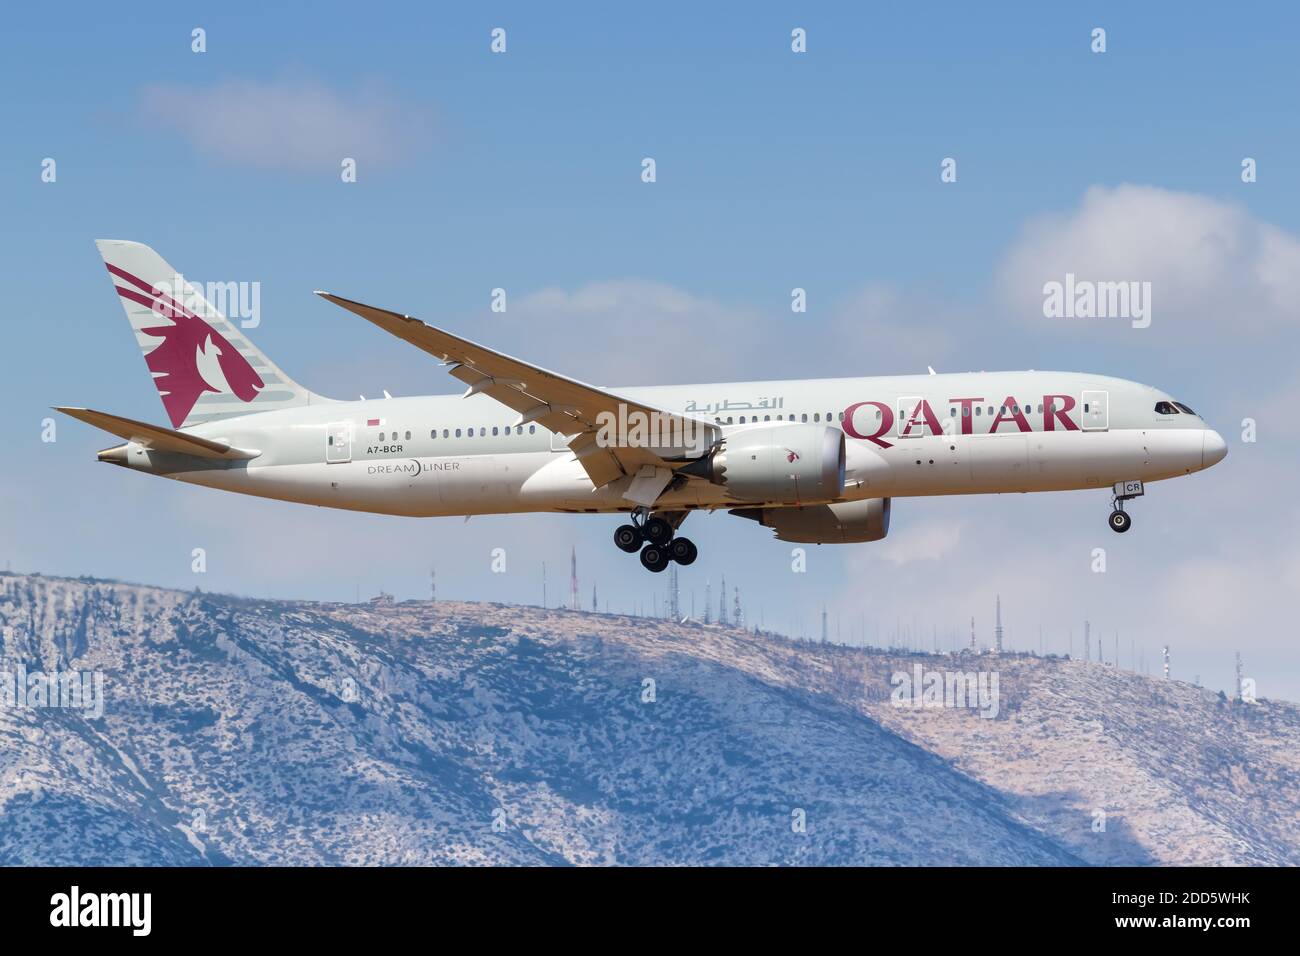 Athens, Greece - September 22, 2020: Qatar Airways Boeing 787-8 Dreamliner airplane Athens Airport in Greece. Boeing is an American aircraft manufactu Stock Photo